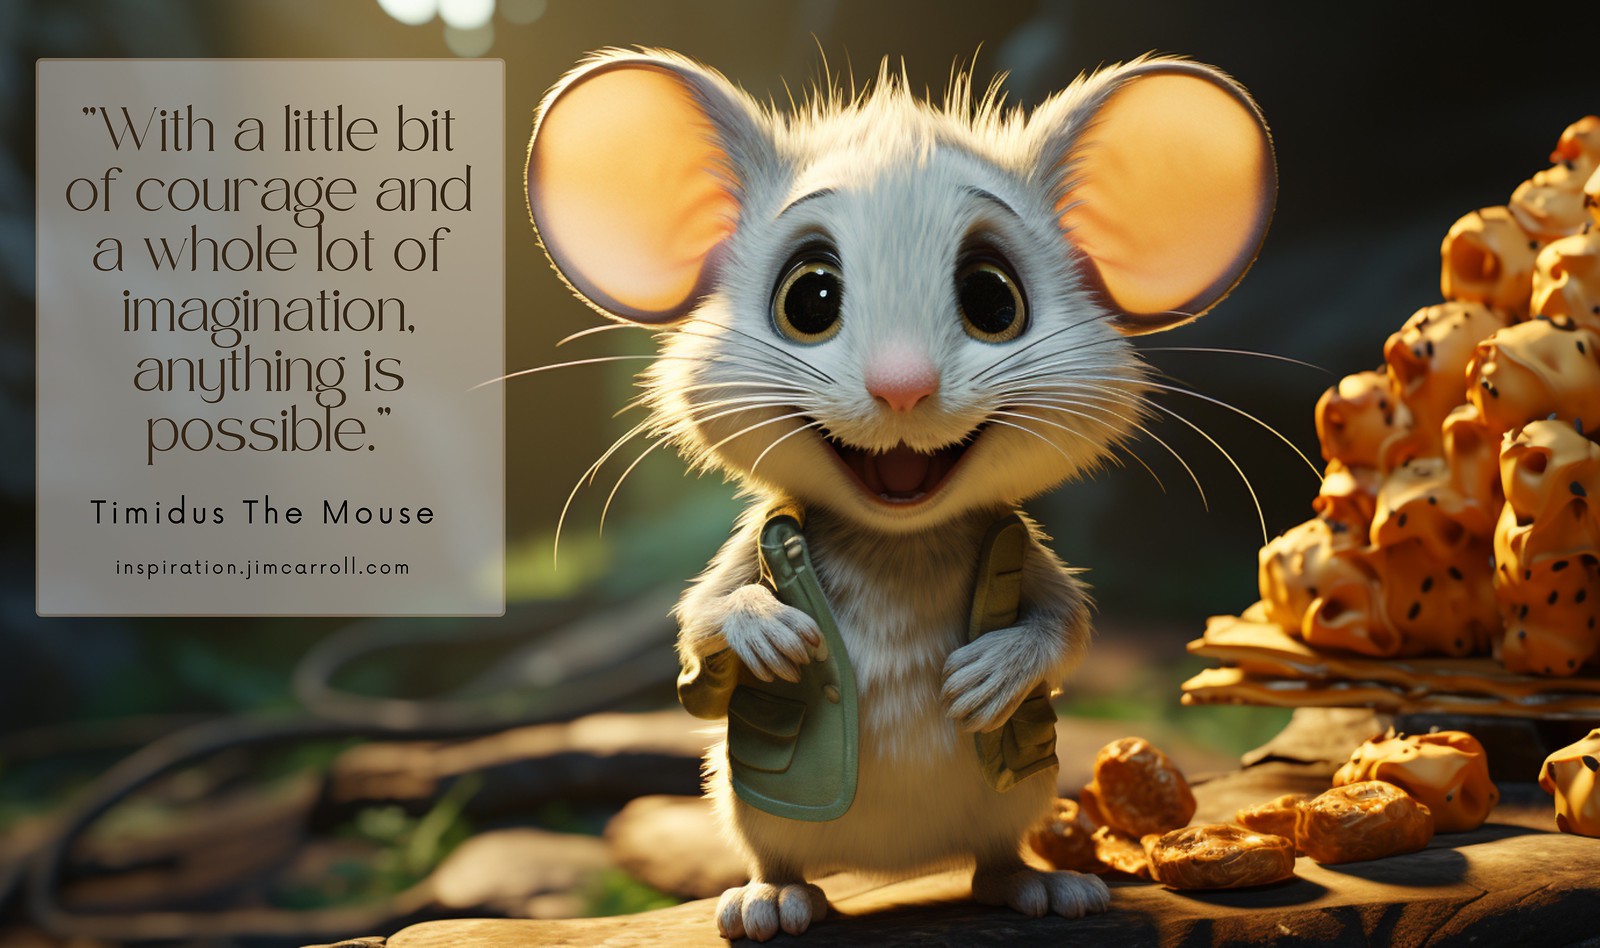 "With a little bit of courage and a whole lot of imagination, anything is possible." - Timidus the Mouse